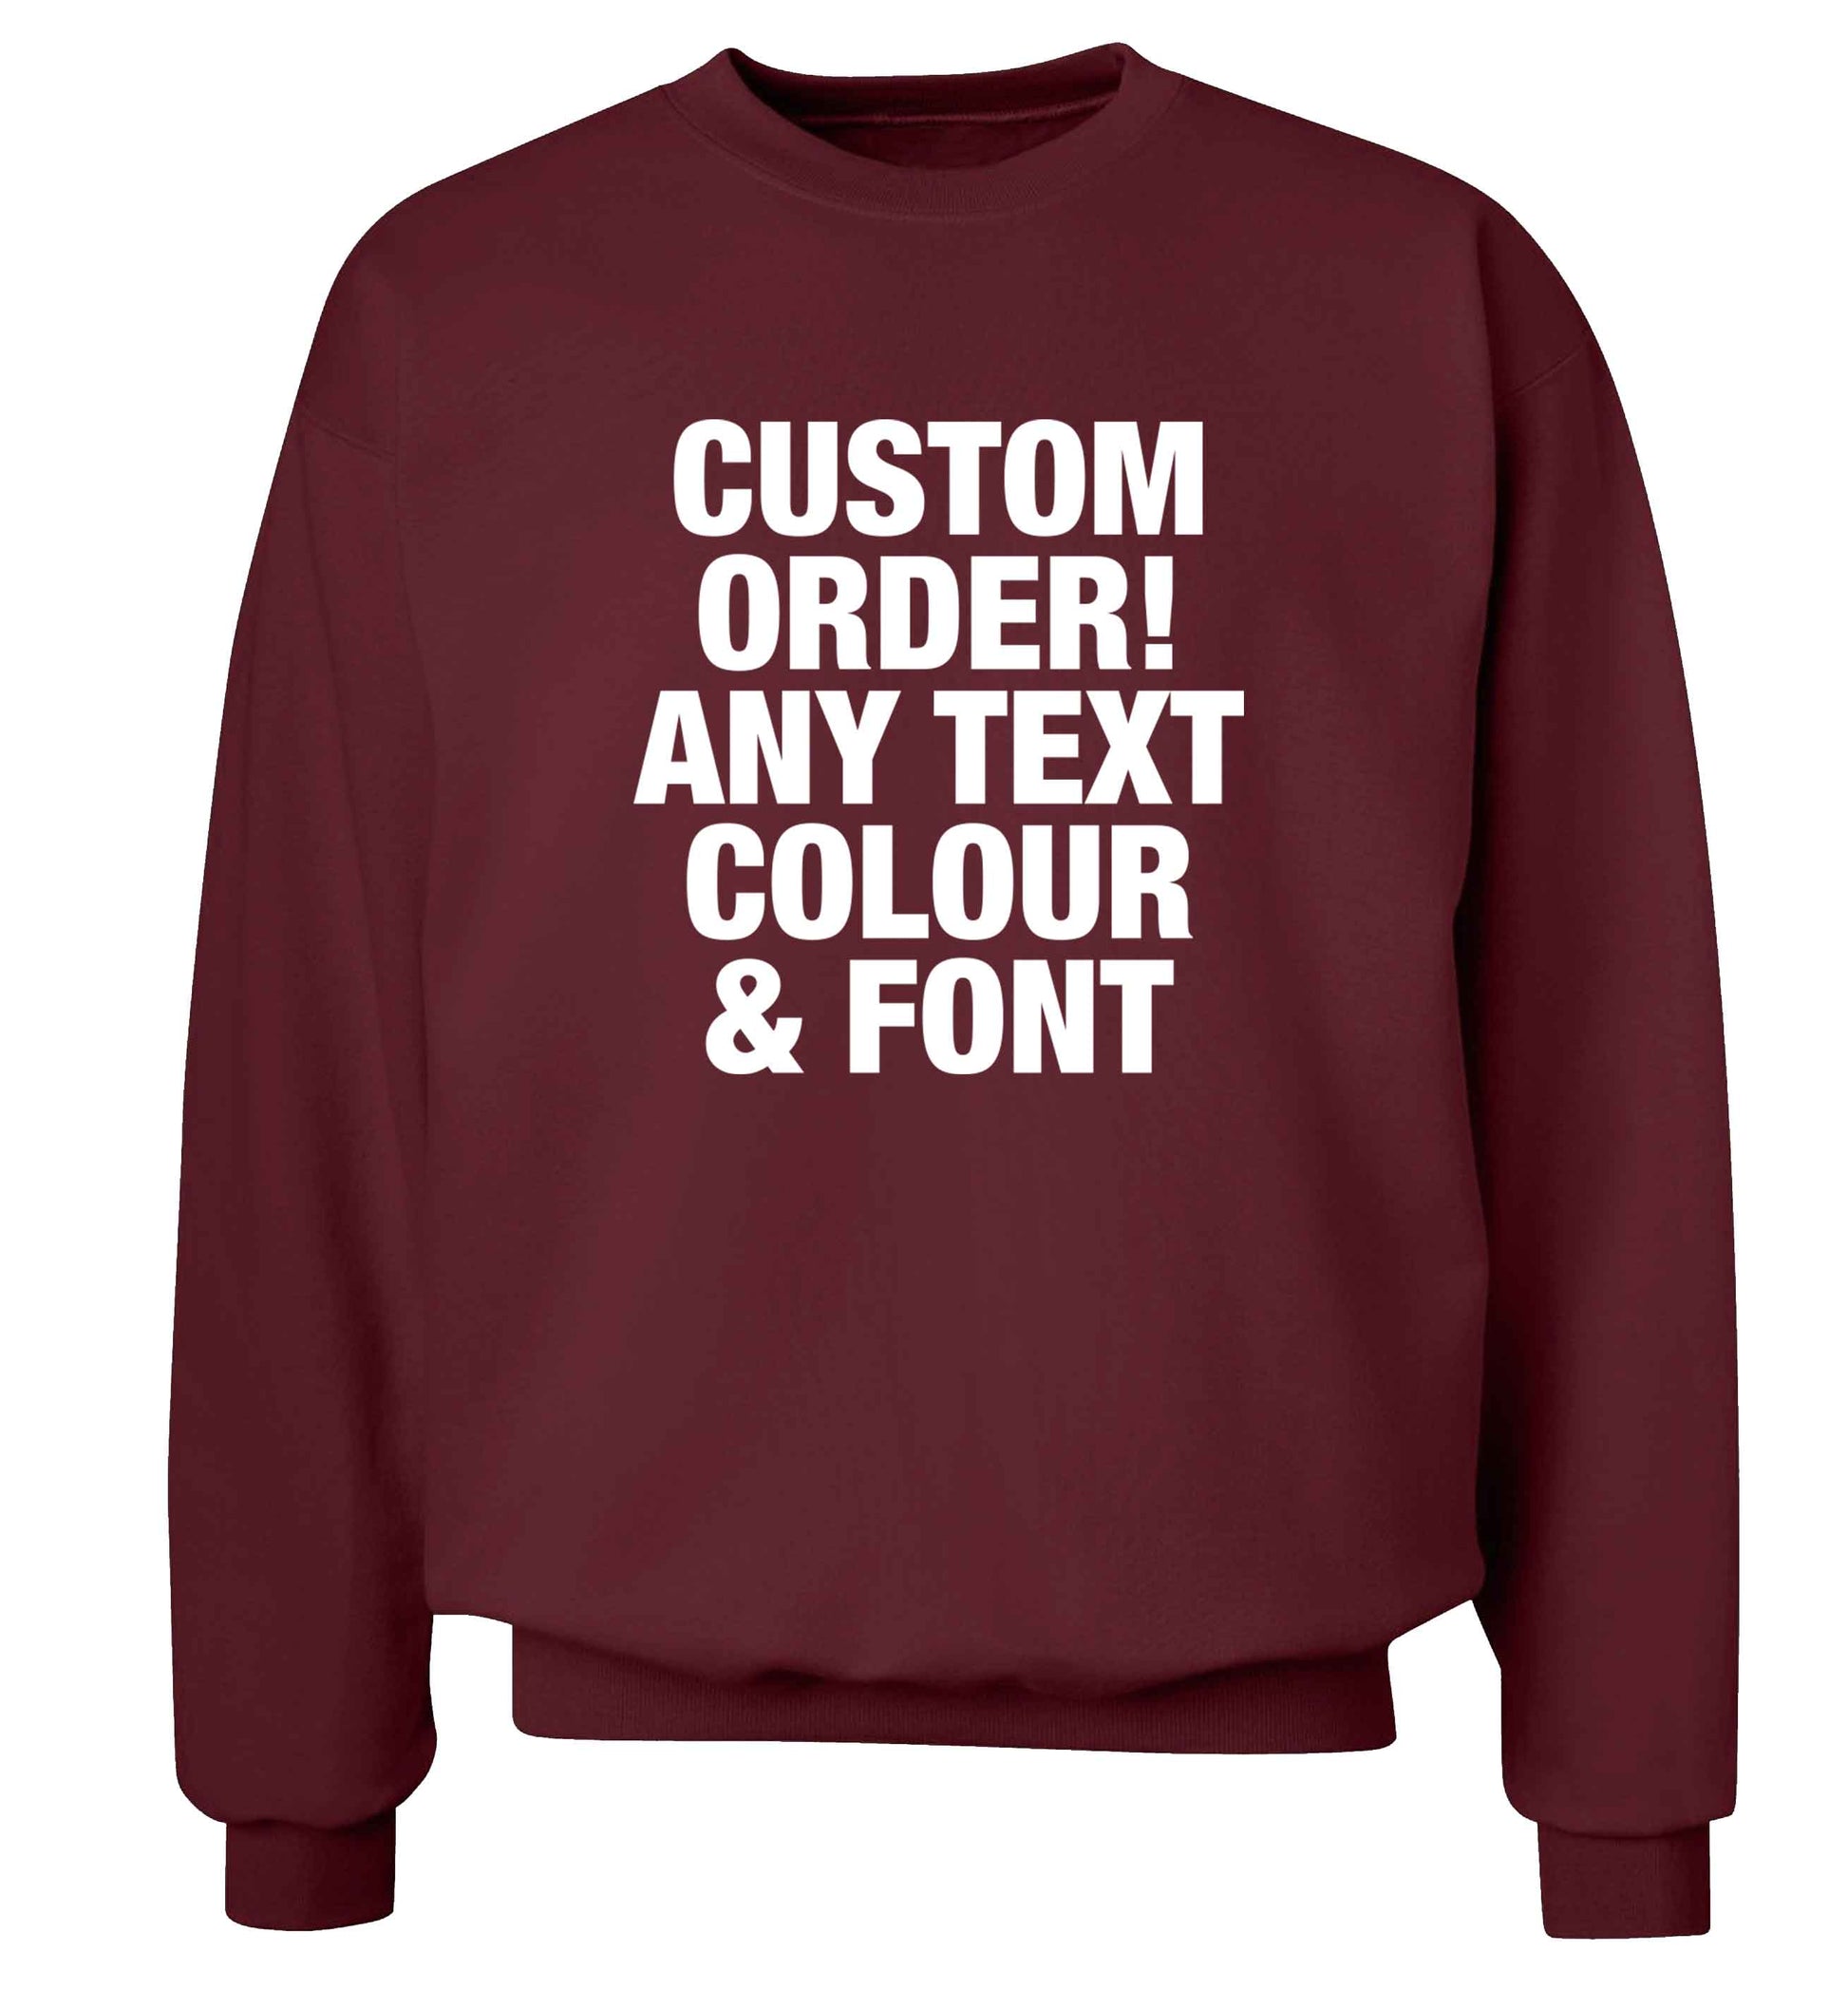 Custom order any text colour and font adult's unisex maroon sweater 2XL